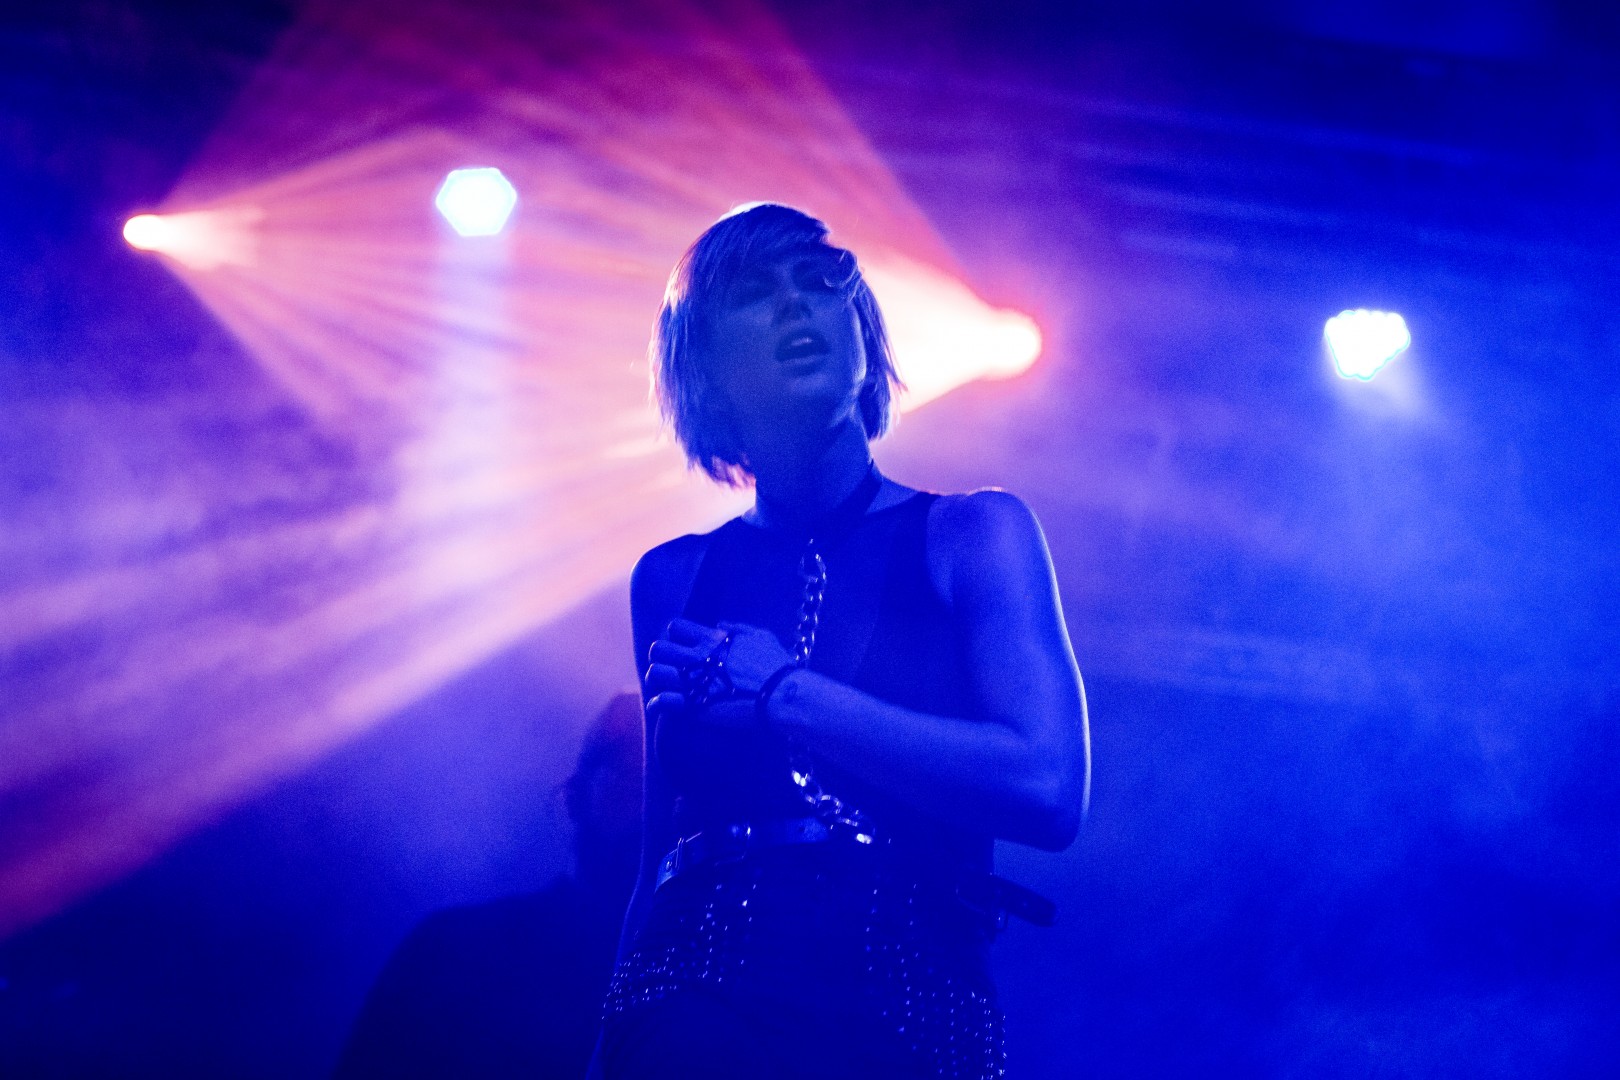 Phantogram at Quantic in Bucharest on March 30, 2017 (6712ae67ea)